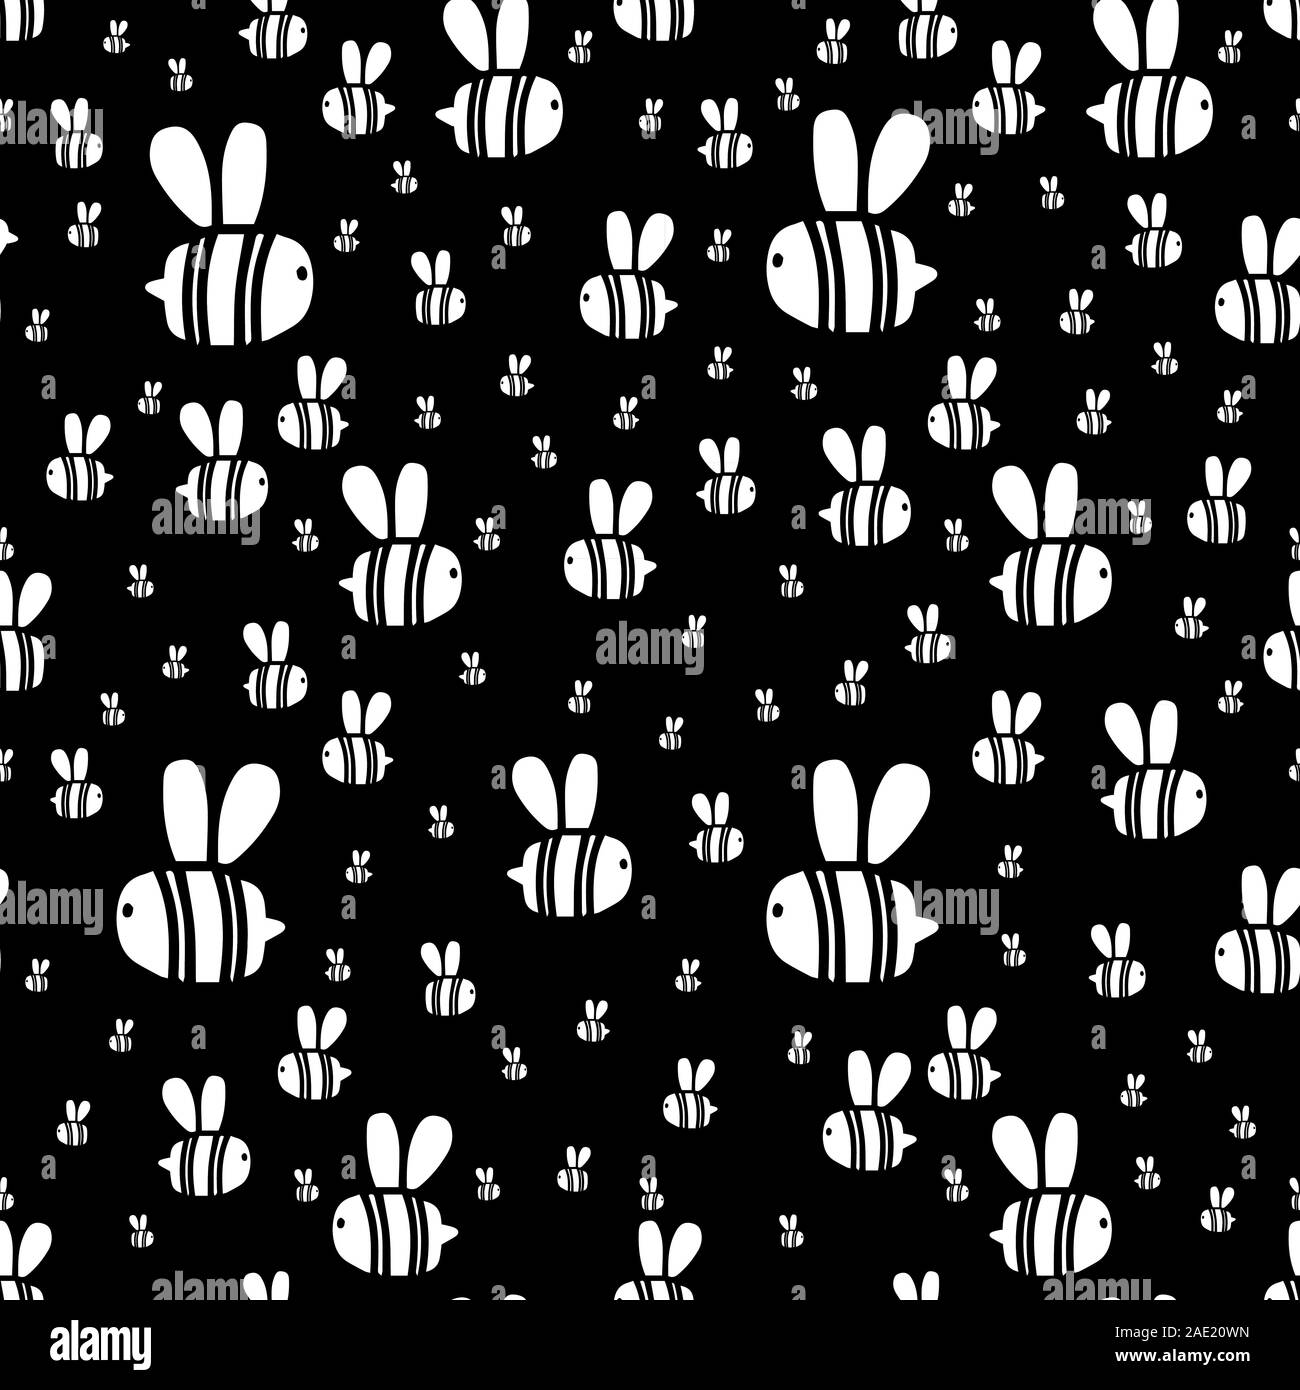 Seamless pattern white honeybee isolated on black background in doodle style. Cute baby print with insects bees. Easter spring hand drawn creative bac Stock Vector